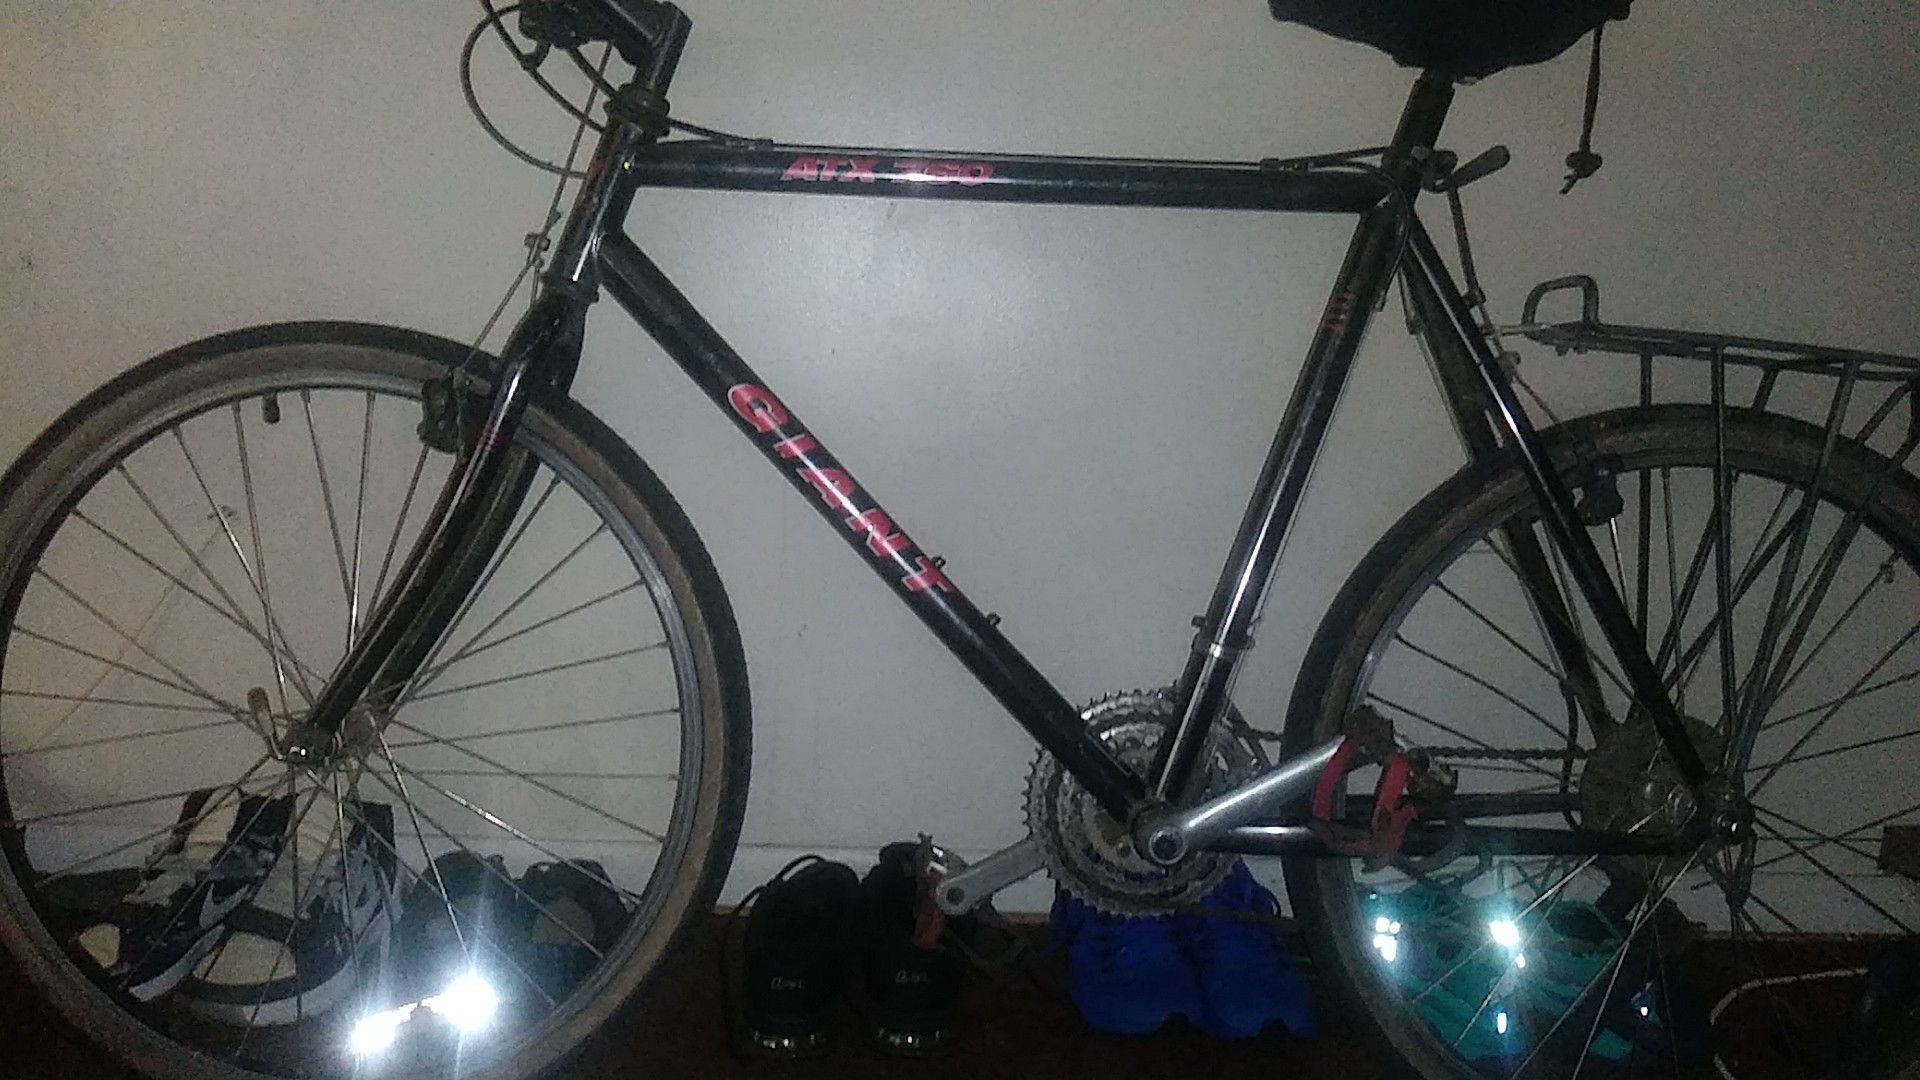 ATX 760 GIANT bike its a old version ' needs a good tune up but runs well